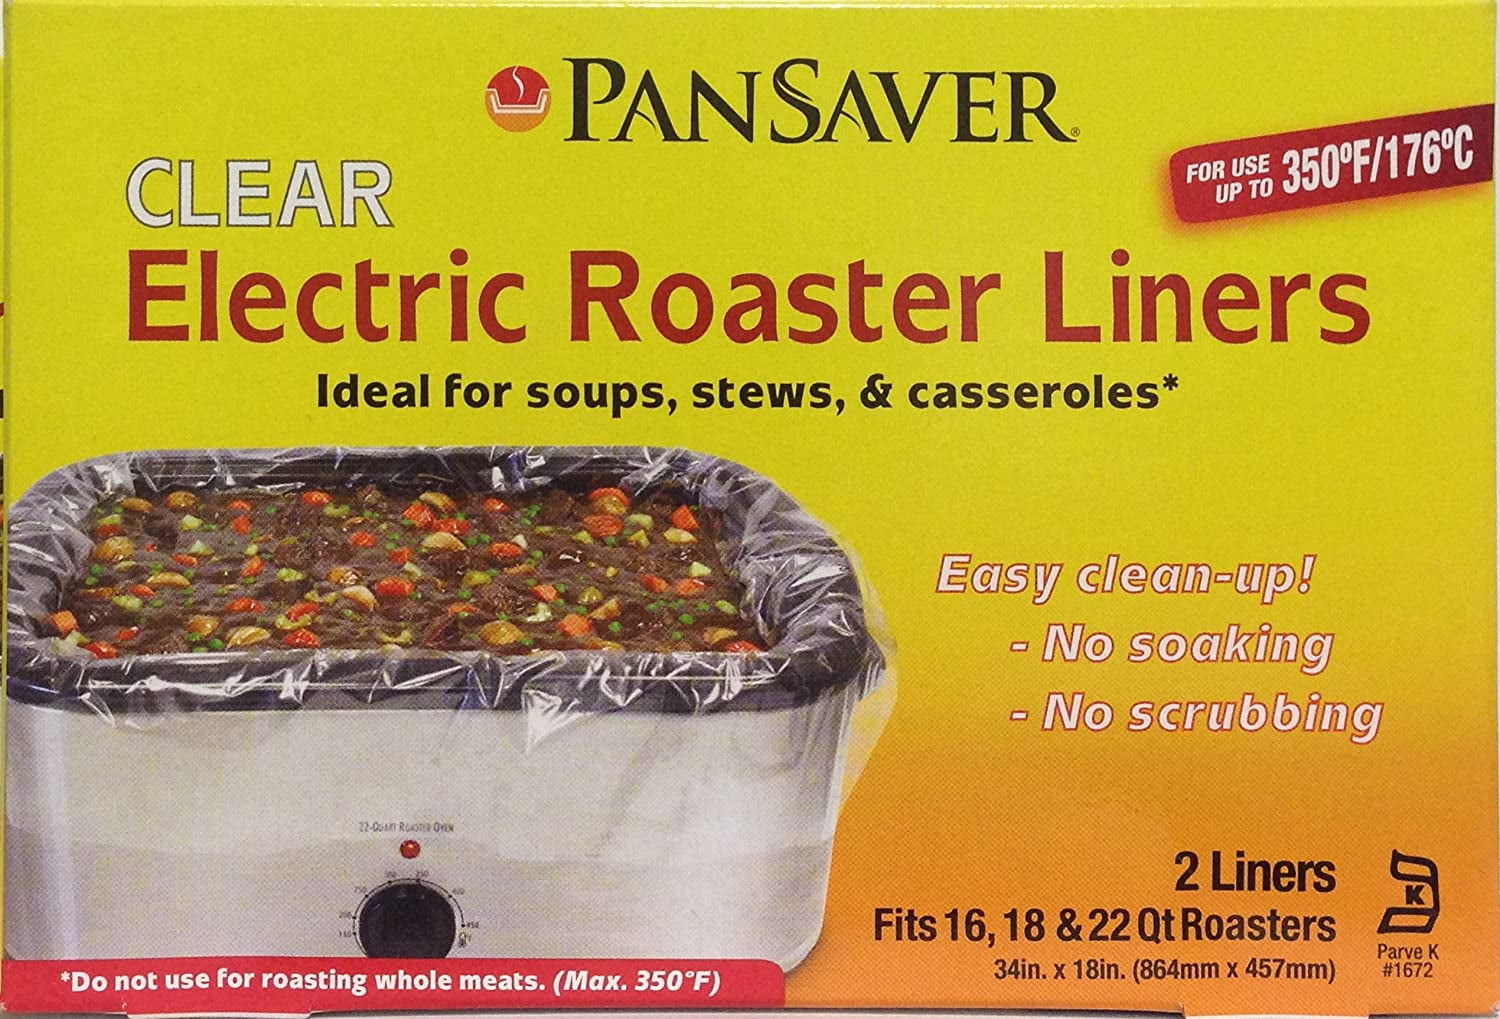  Pansaver Electric Roaster Liners, 3 Box Bundle (Liners for 6  Roasters) Includes Instructions & Video Link. Fits 16, 18 & 22 Quart  Roasters.: Home & Kitchen